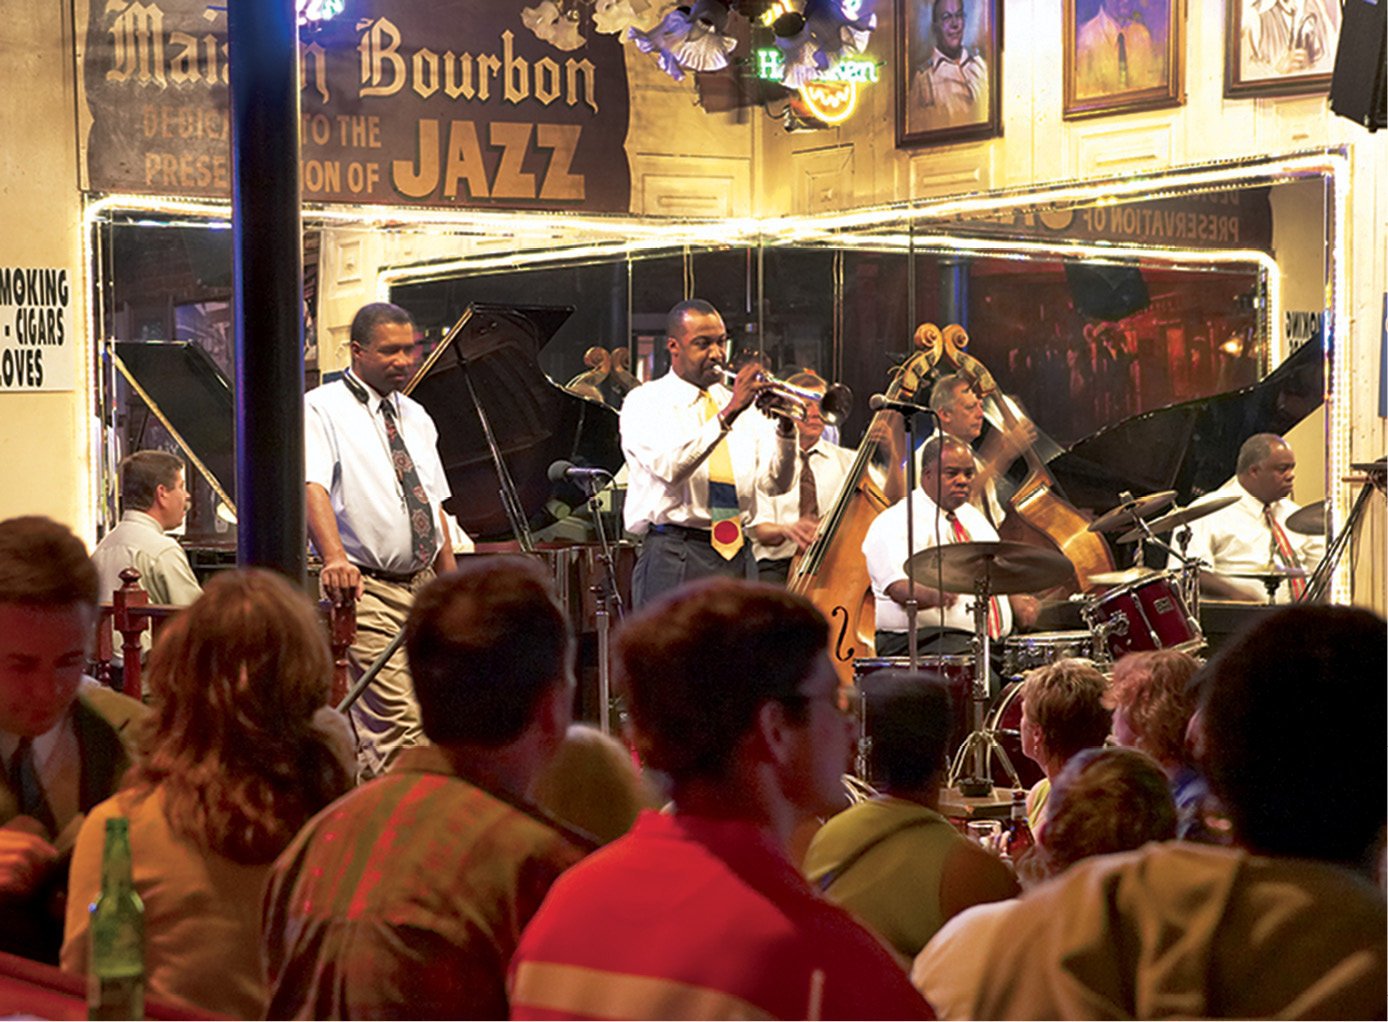 Maison Bourbon is one of the French Quarters top spots for traditional jazz - photo 9